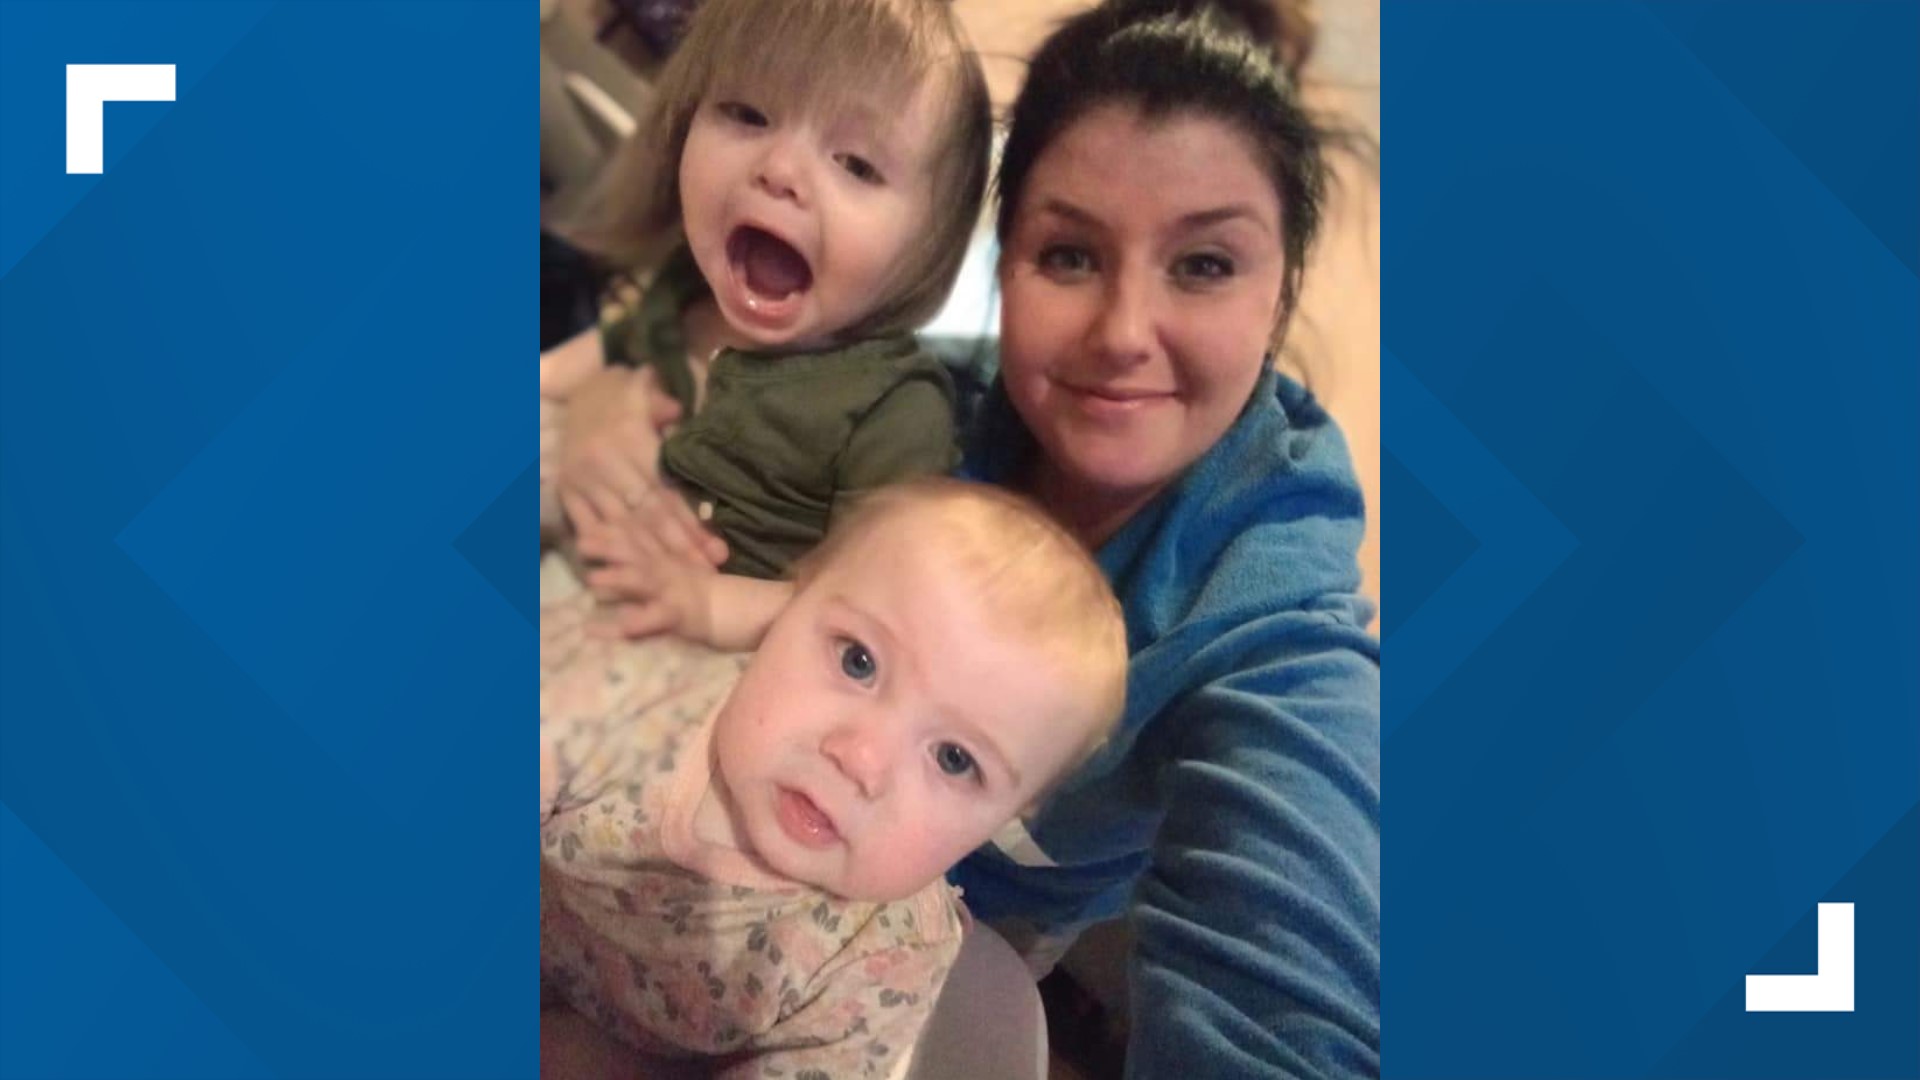 Ashley Green was on suboxone while she was pregnant with her first daughter. Now, she has a second daughter and has been heroin-free for three years.